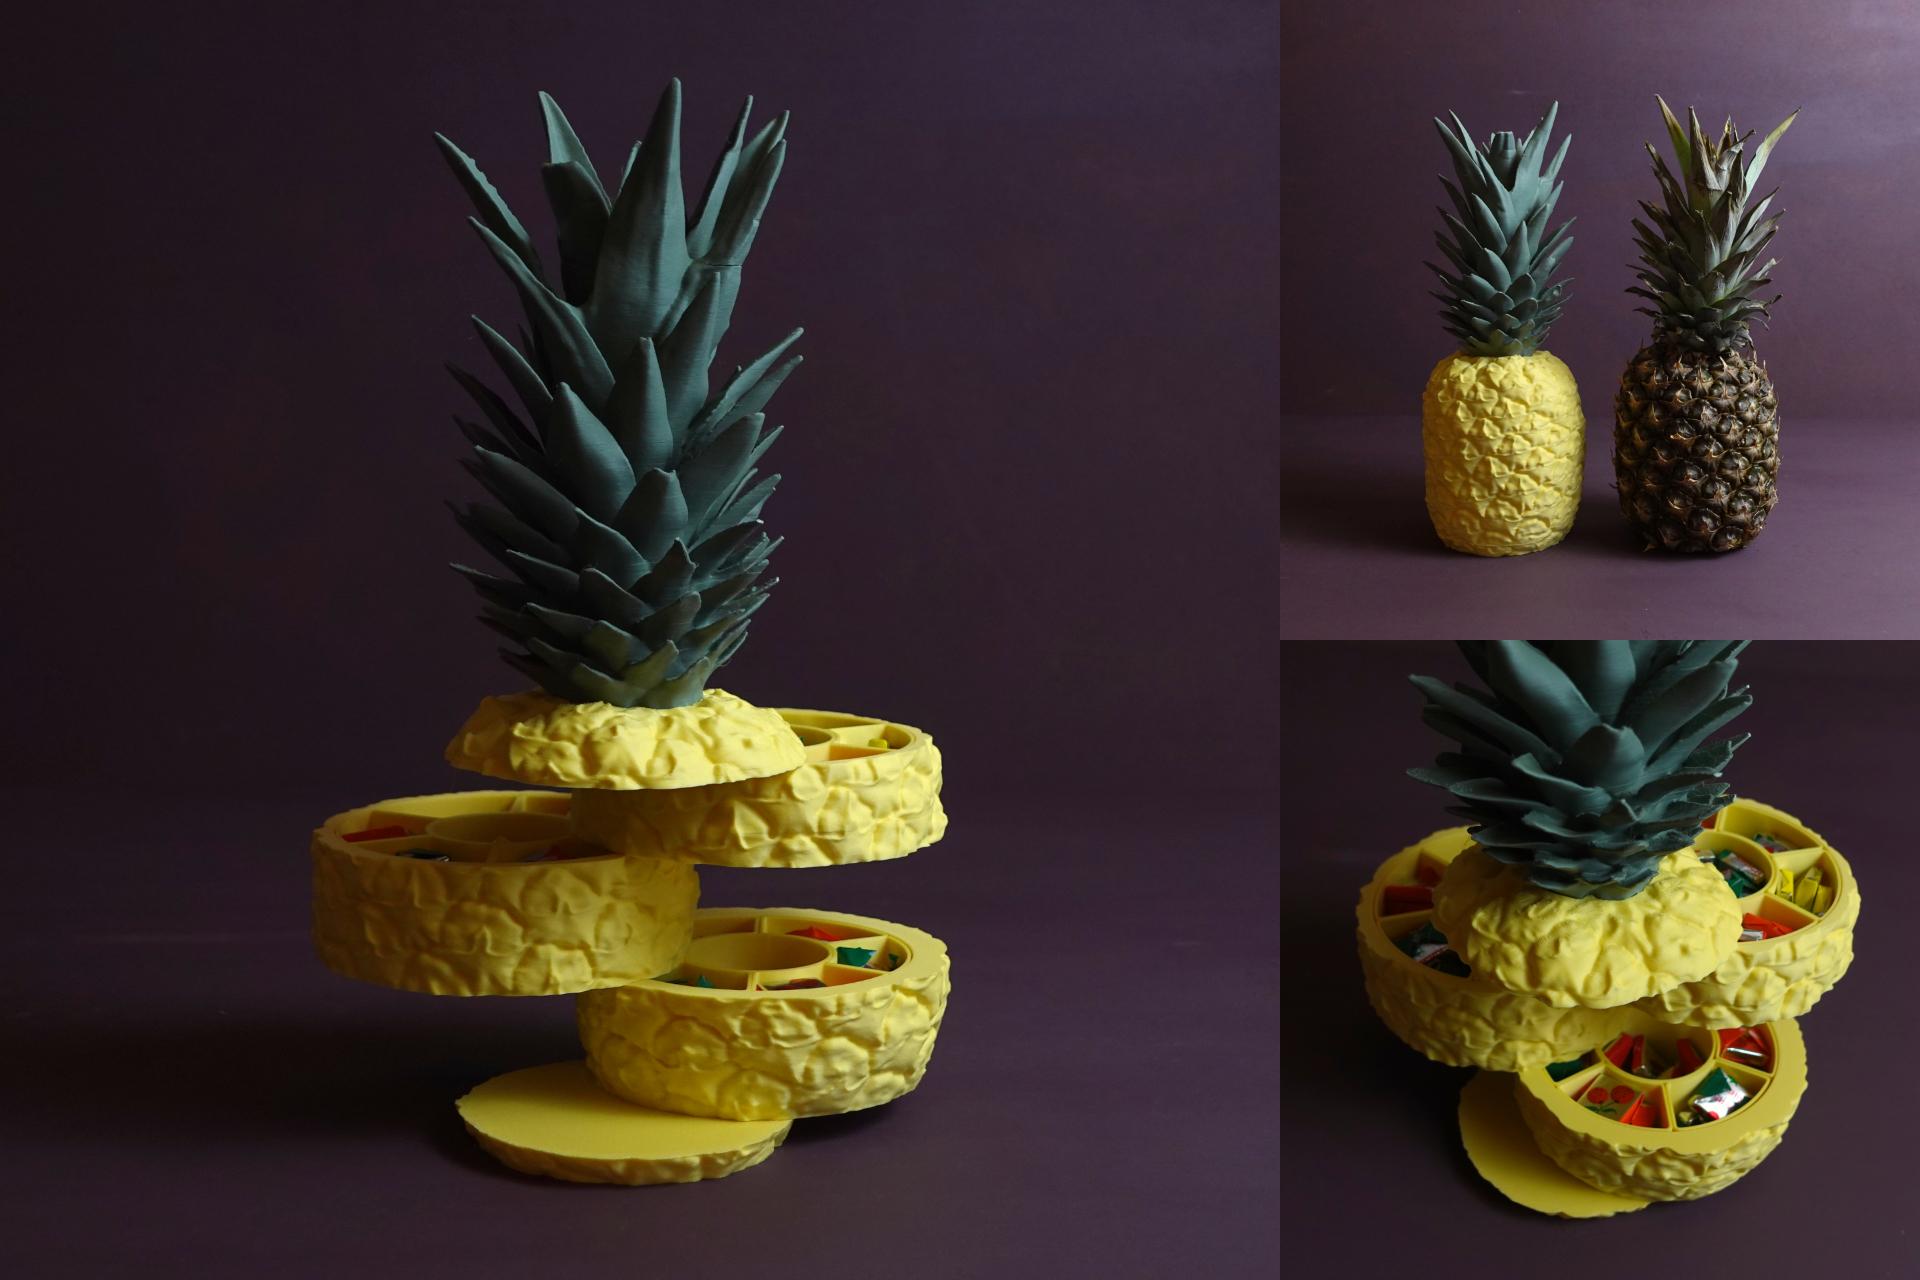 Want some pineapple slices?